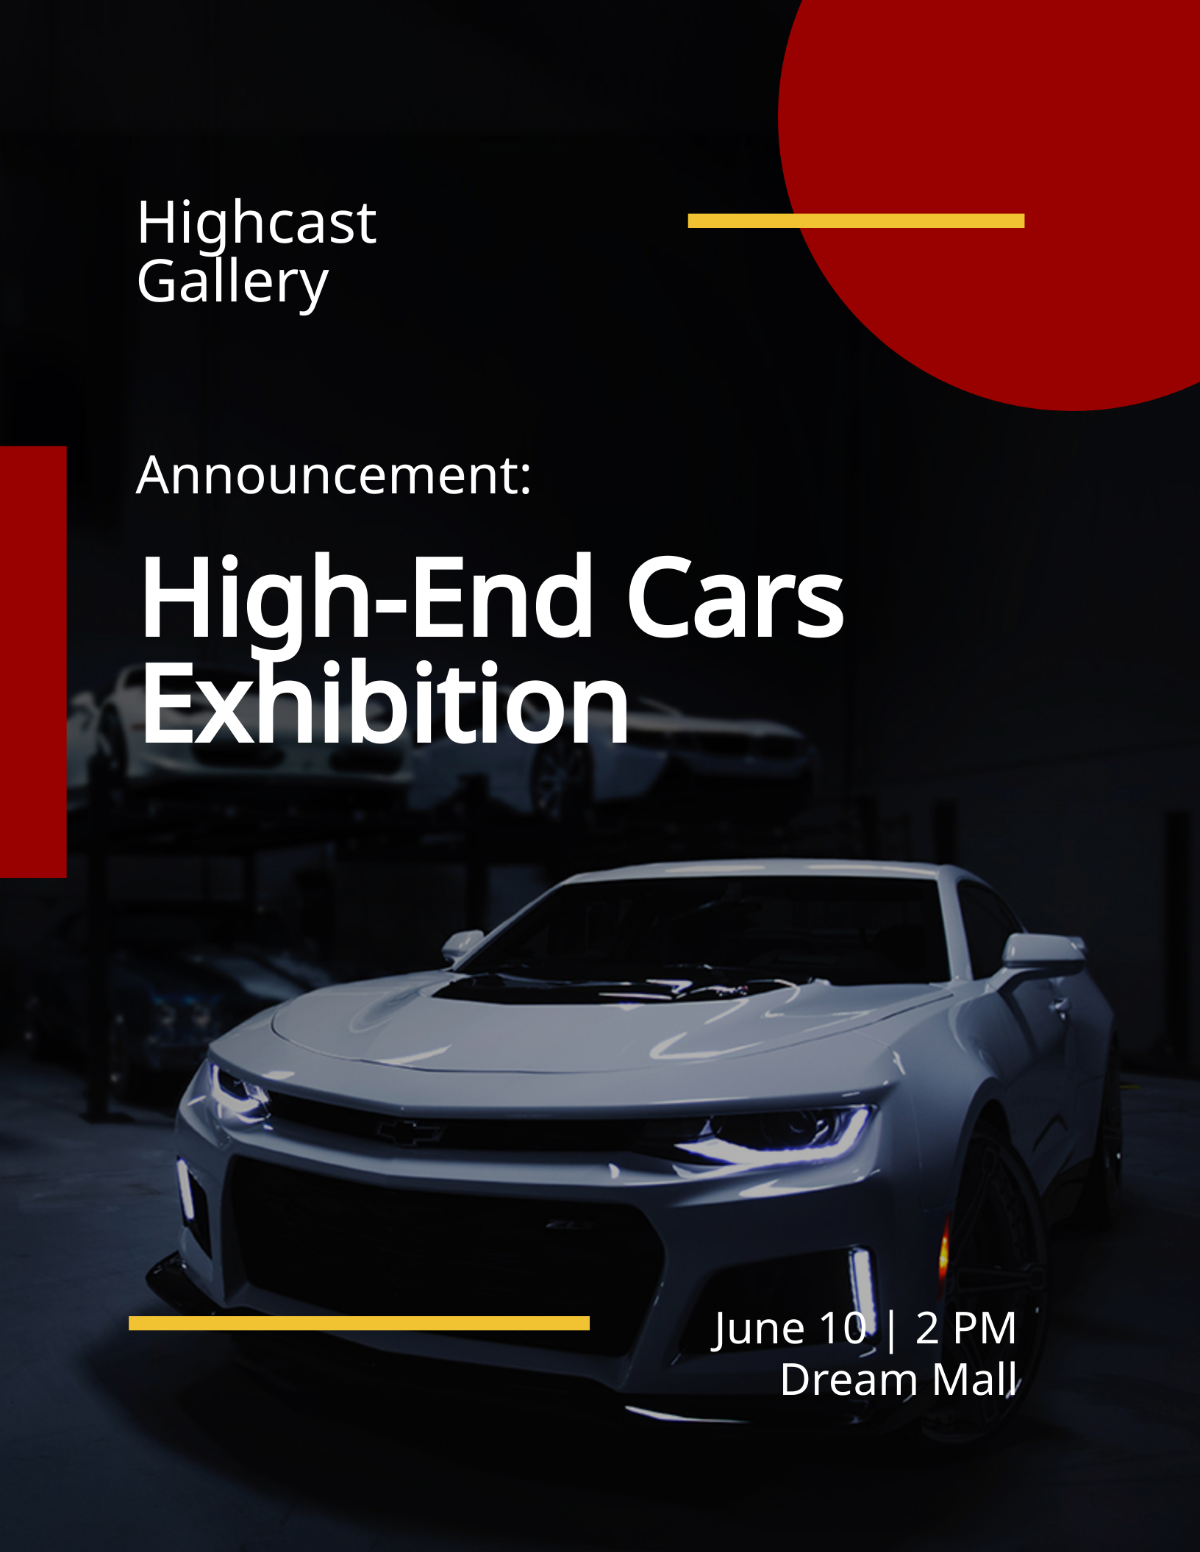 Free Exhibition Announcement Flyer Template